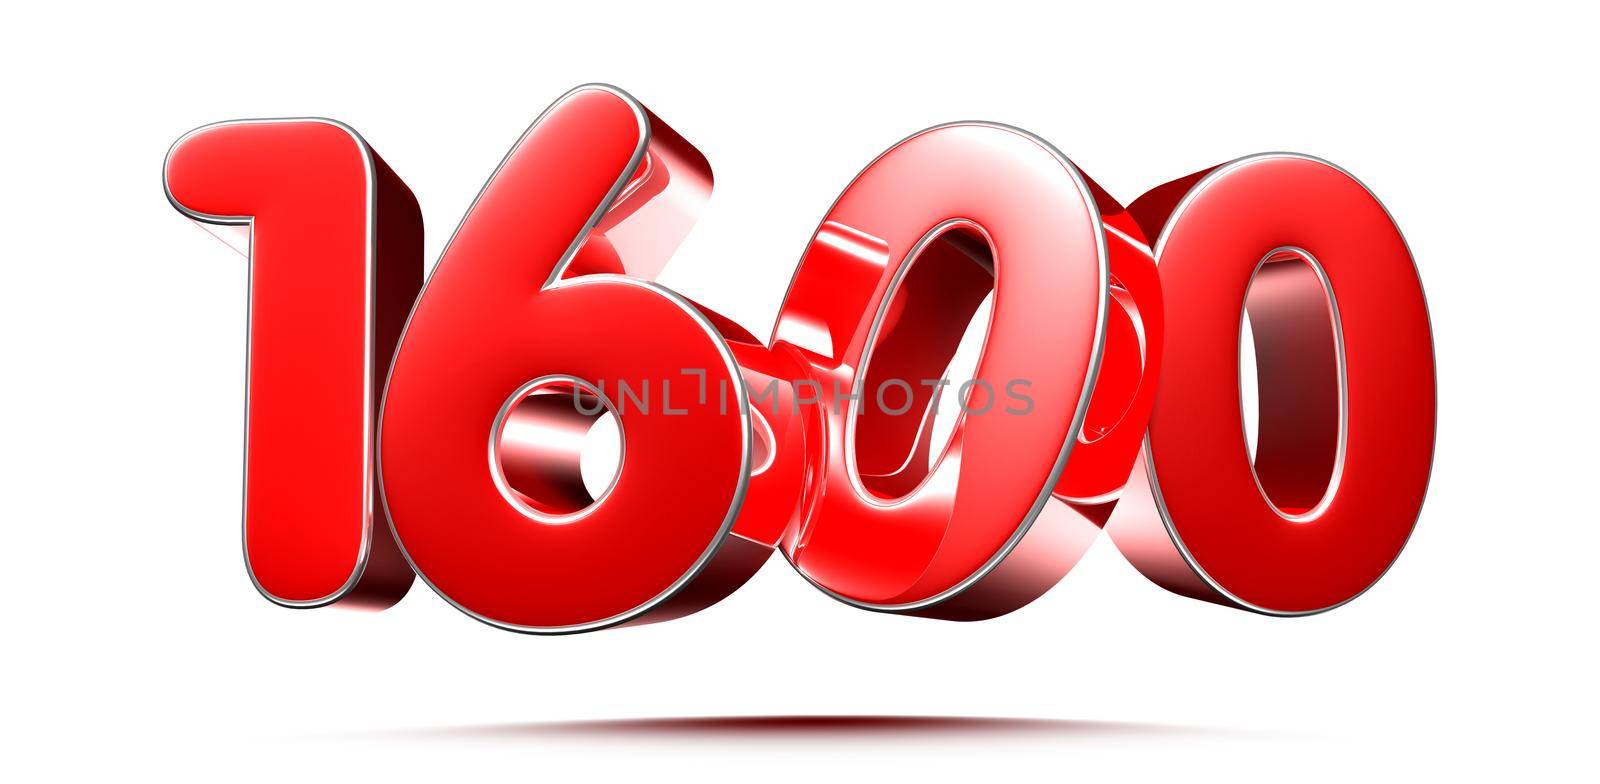 Rounded red numbers 1600 on white background 3D illustration with clipping path by thitimontoyai